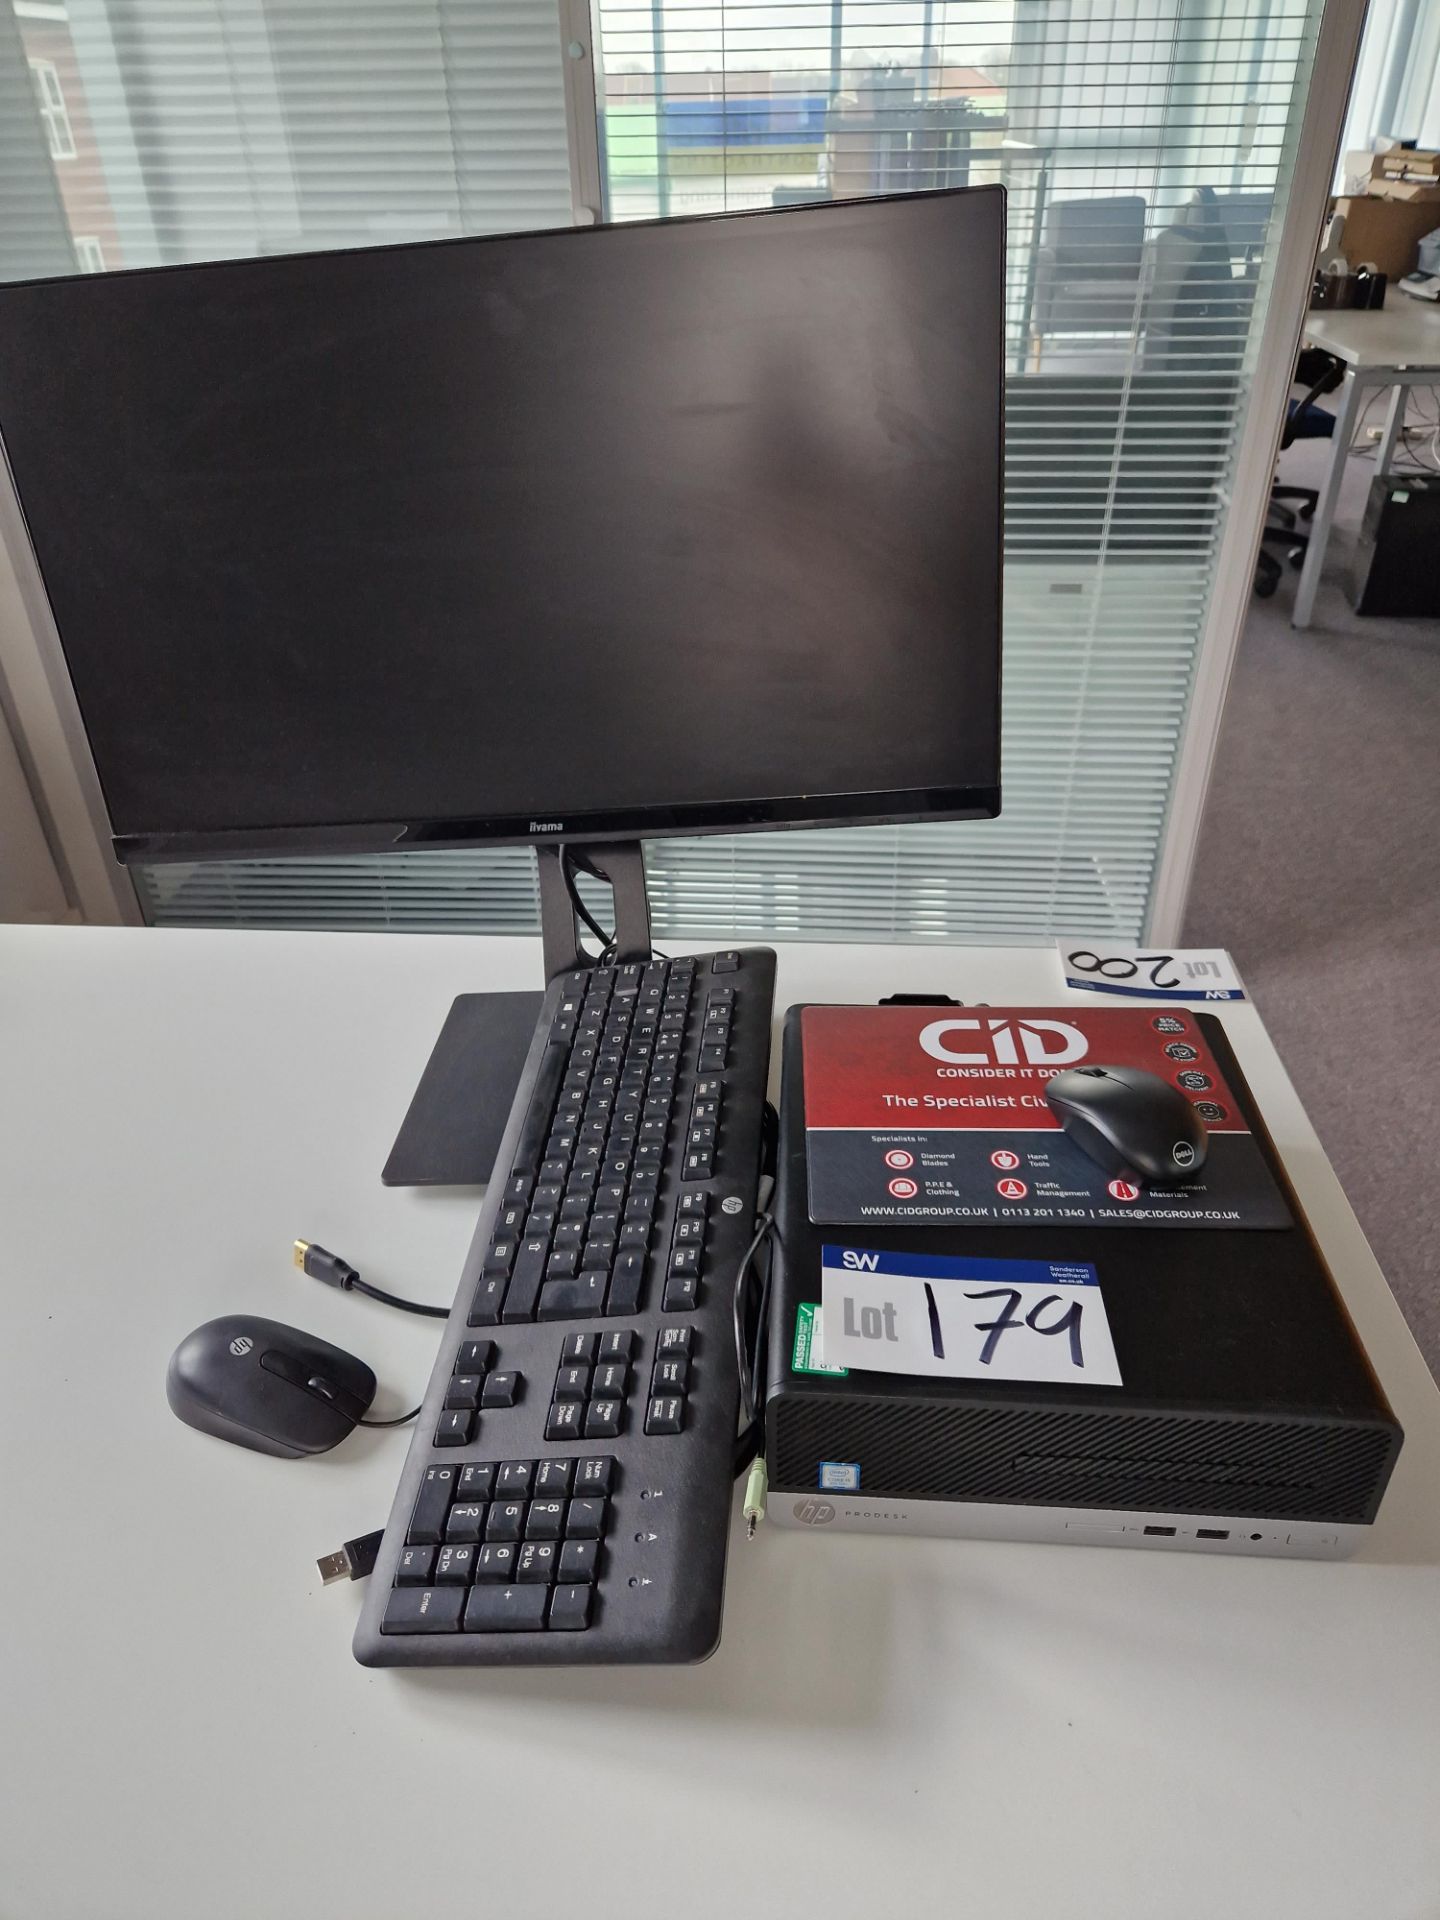 HP ProDesk Core i5 Desktop PC, Monitor, Keyboard and Mouse (Hard Drive Removed) Please read the